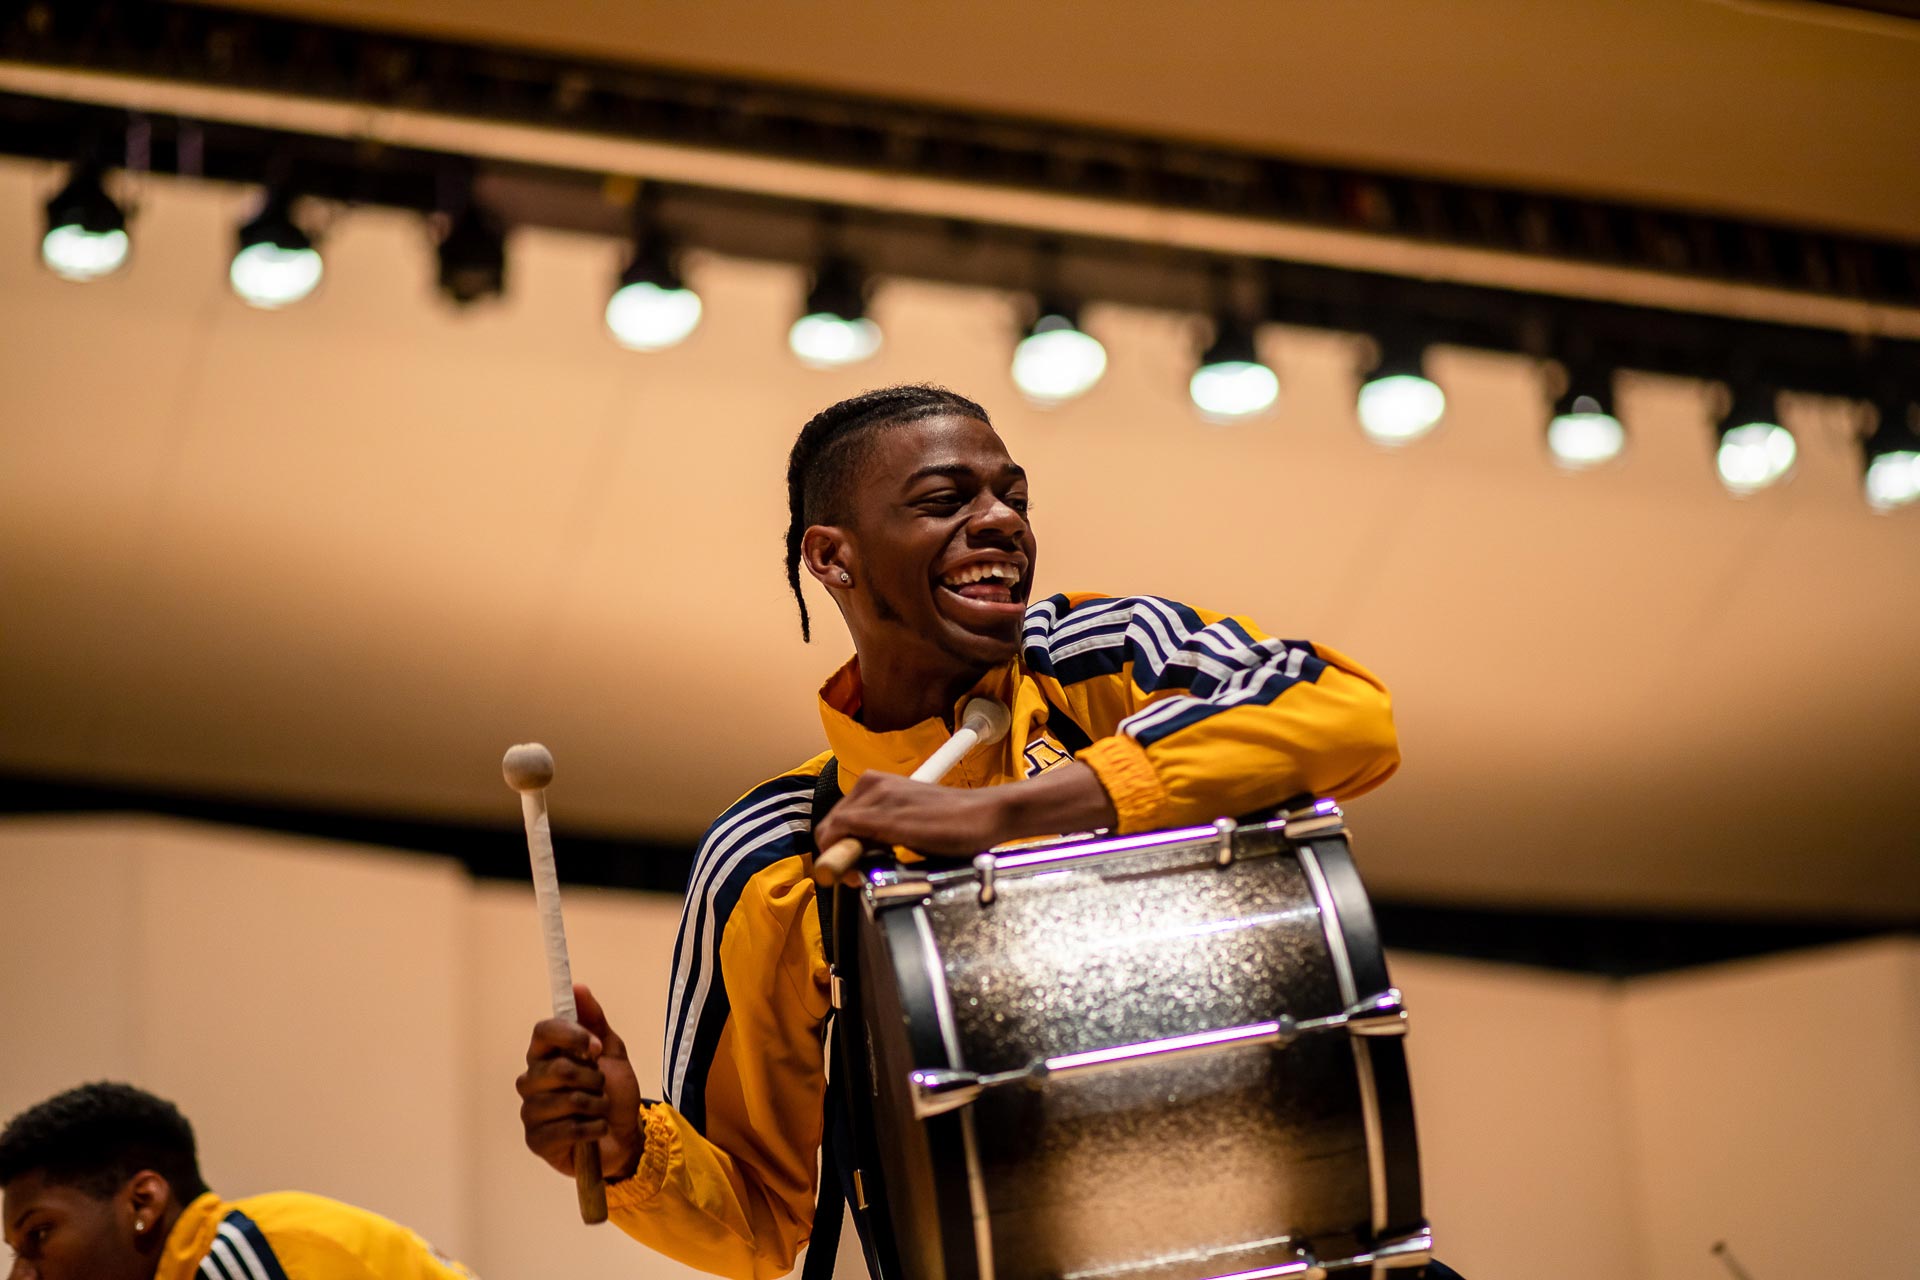 NC A&T's Coldsteel Drumline made some noise in Dana Auditorium!